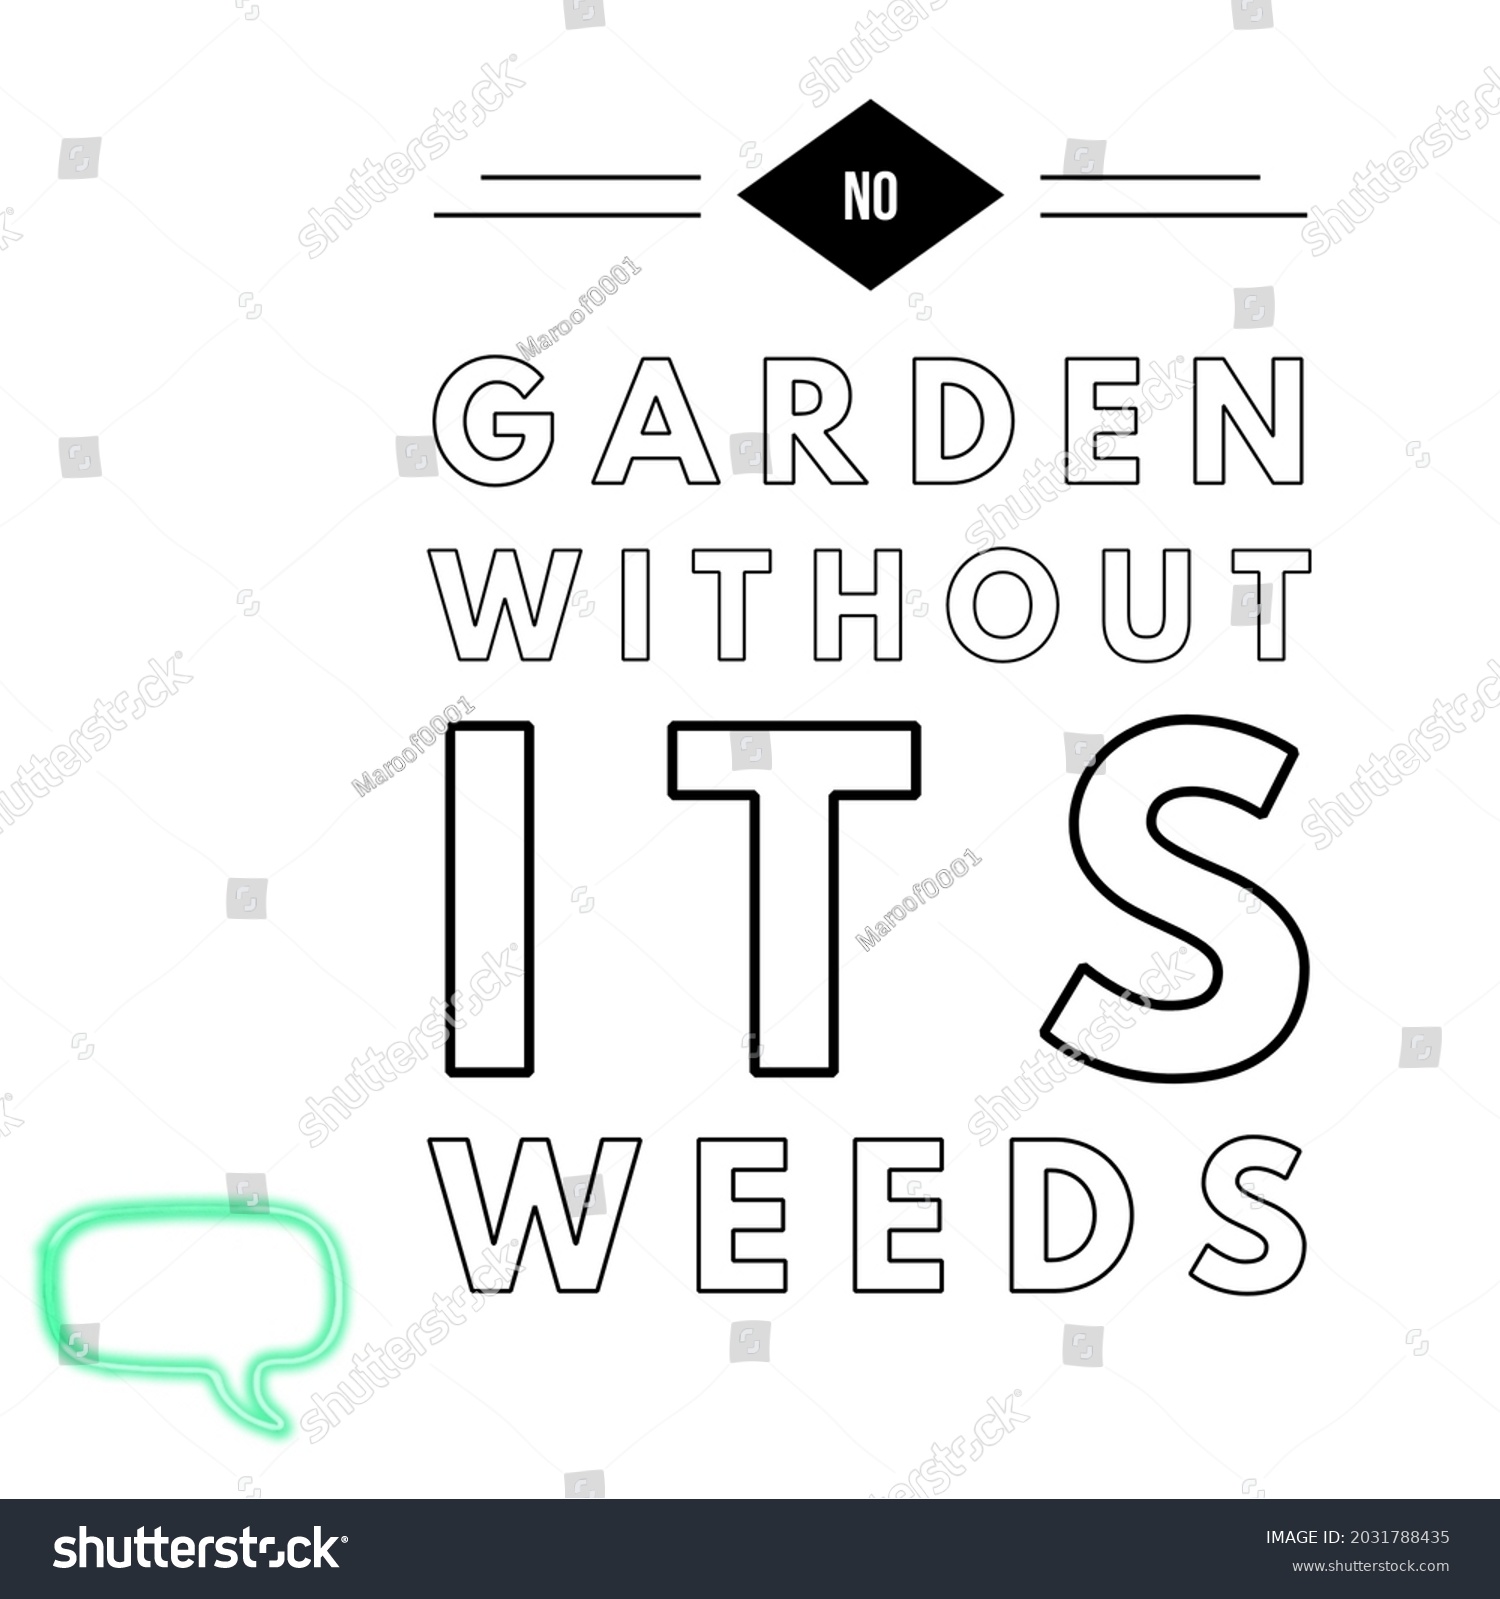 No without weeds there garden is No More